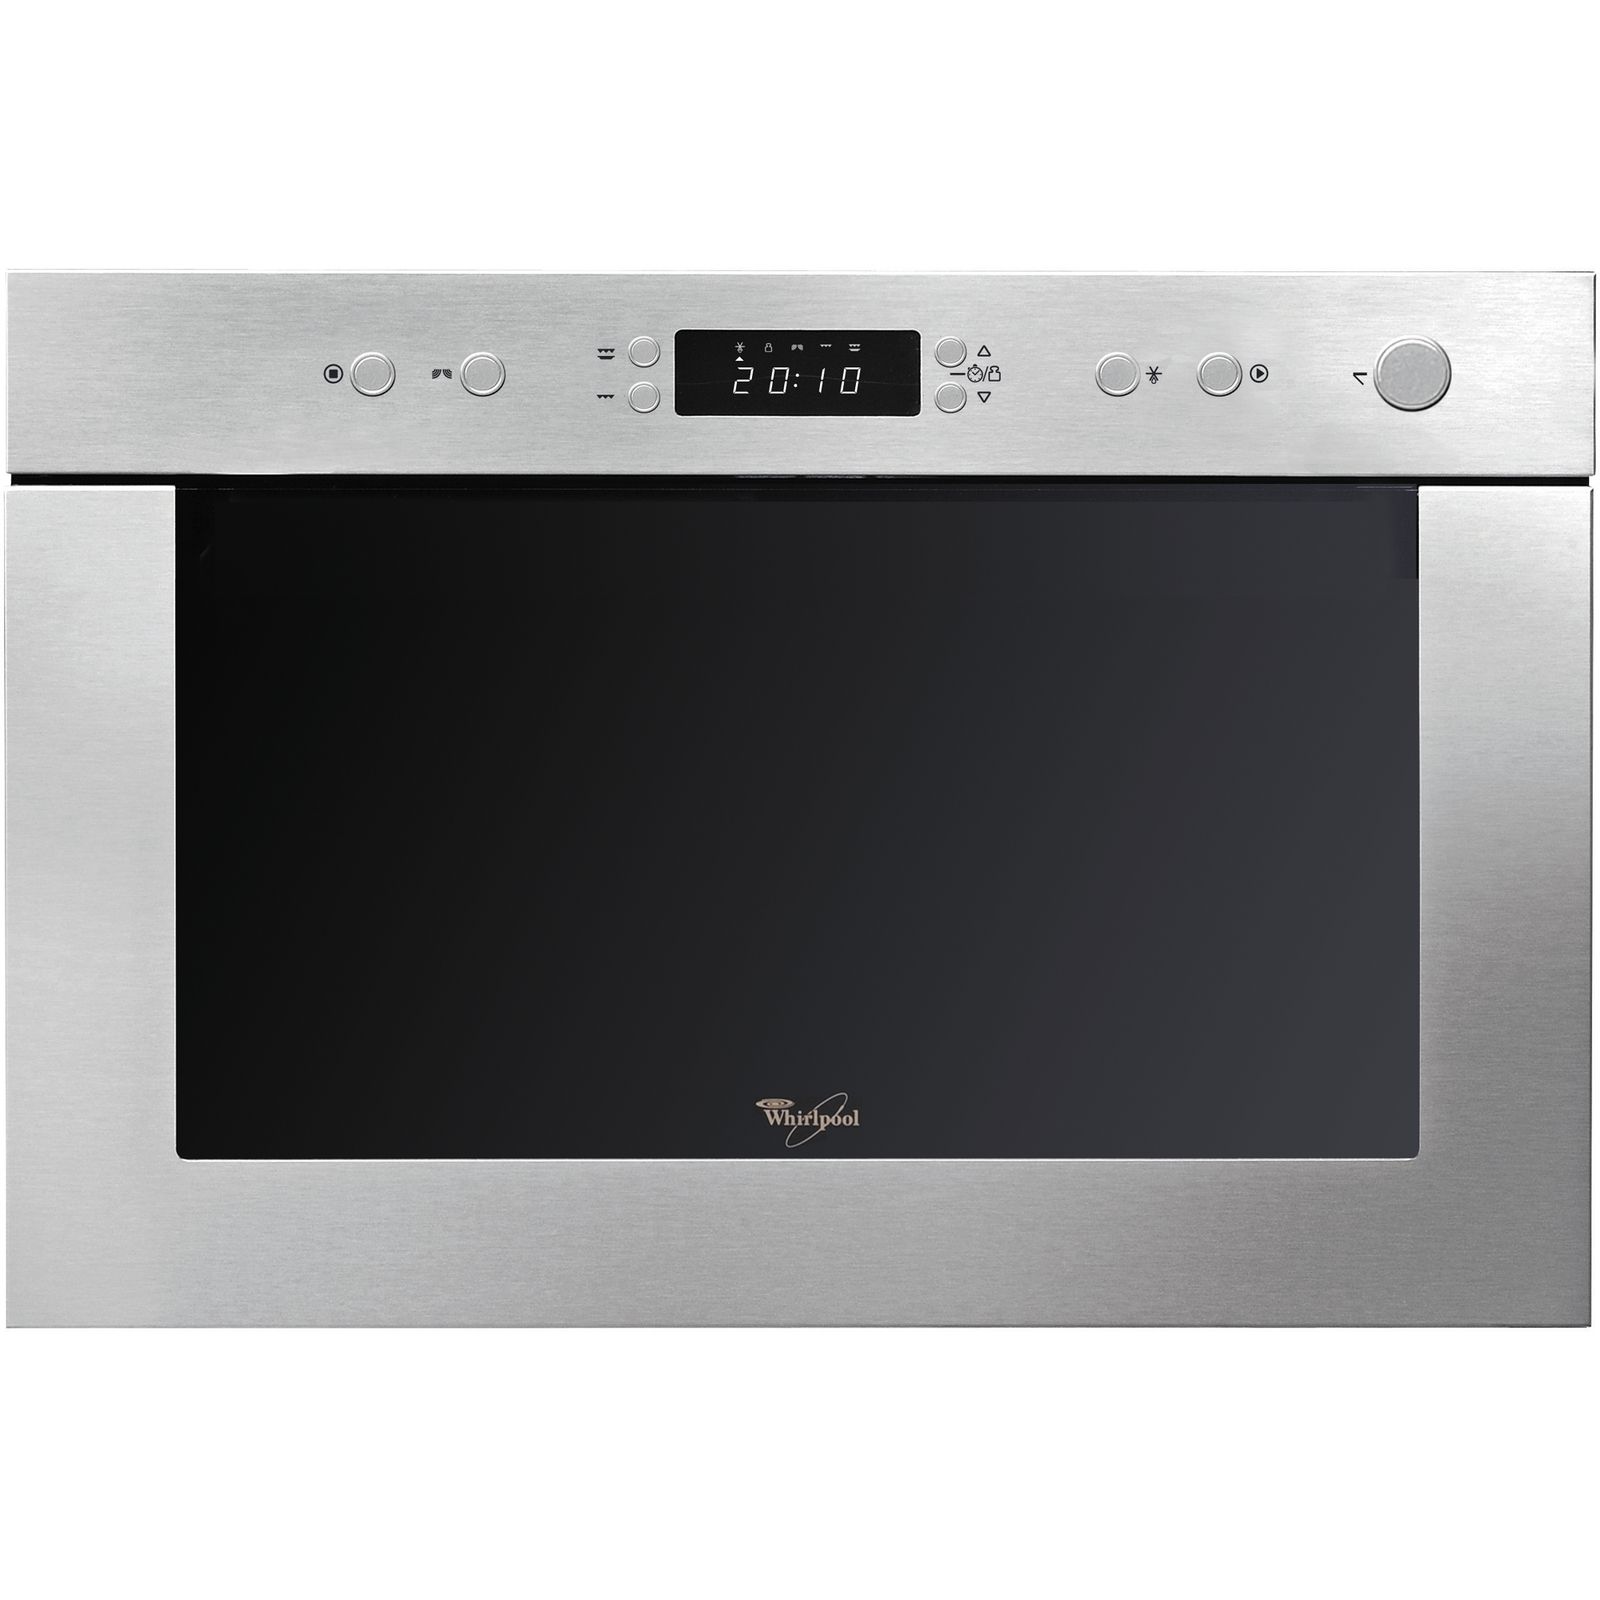 Whirlpool AMW498IX 22L Compact Built-in Microwave Grill Stainless Steel